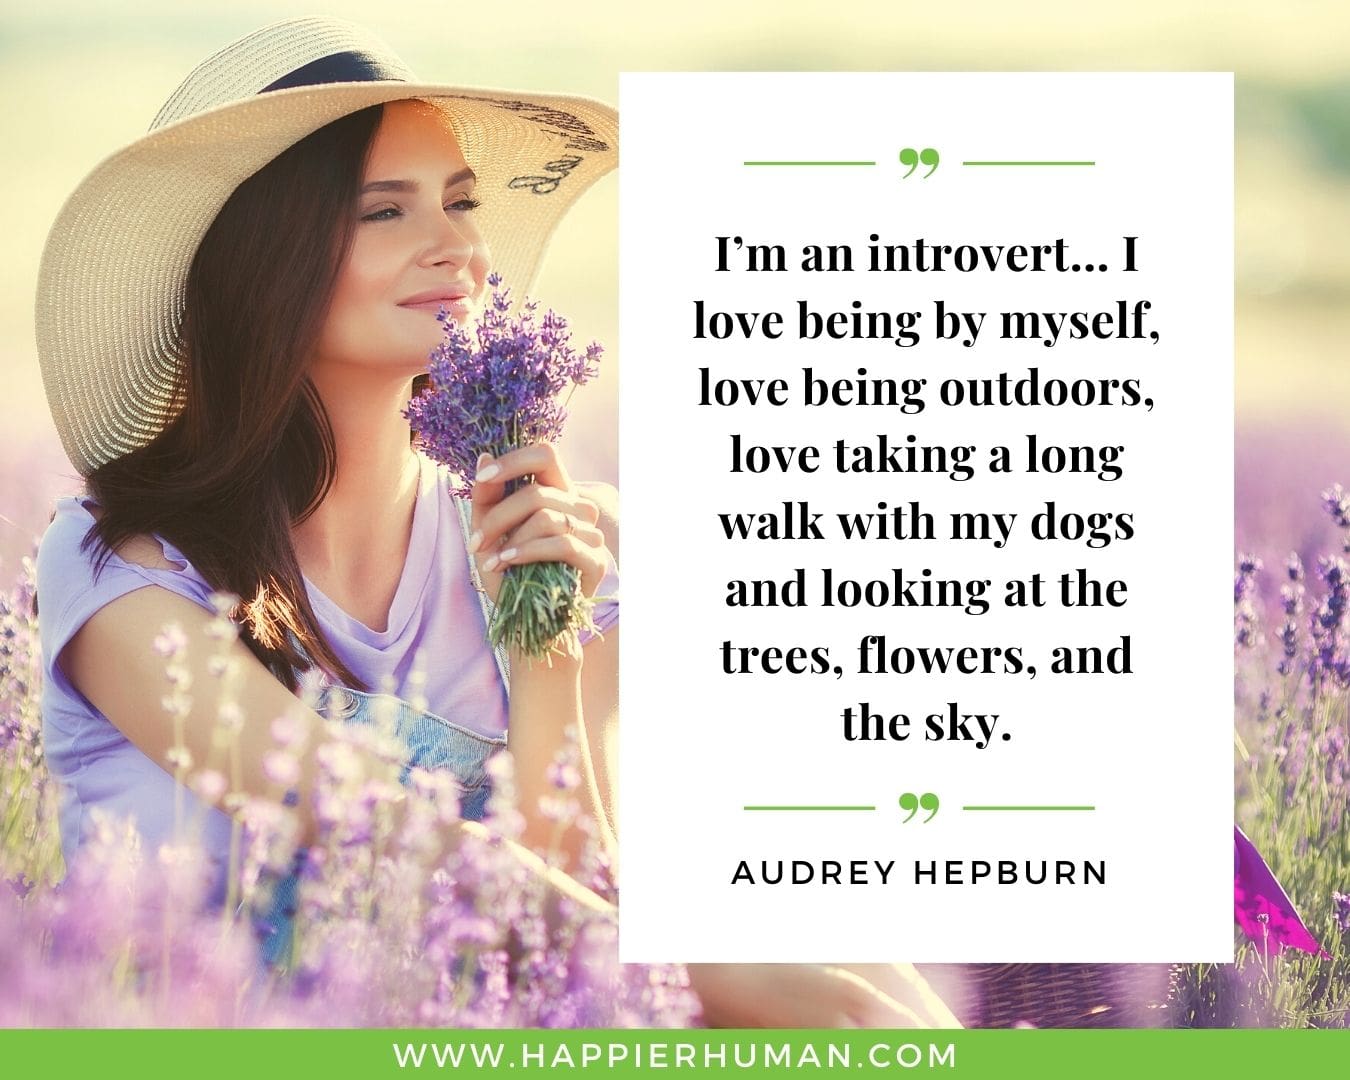 Introvert Quotes - “I’m an introvert… I love being by myself, love being outdoors, love taking a long walk with my dogs and looking at the trees, flowers, and the sky.” – Audrey Hepburn